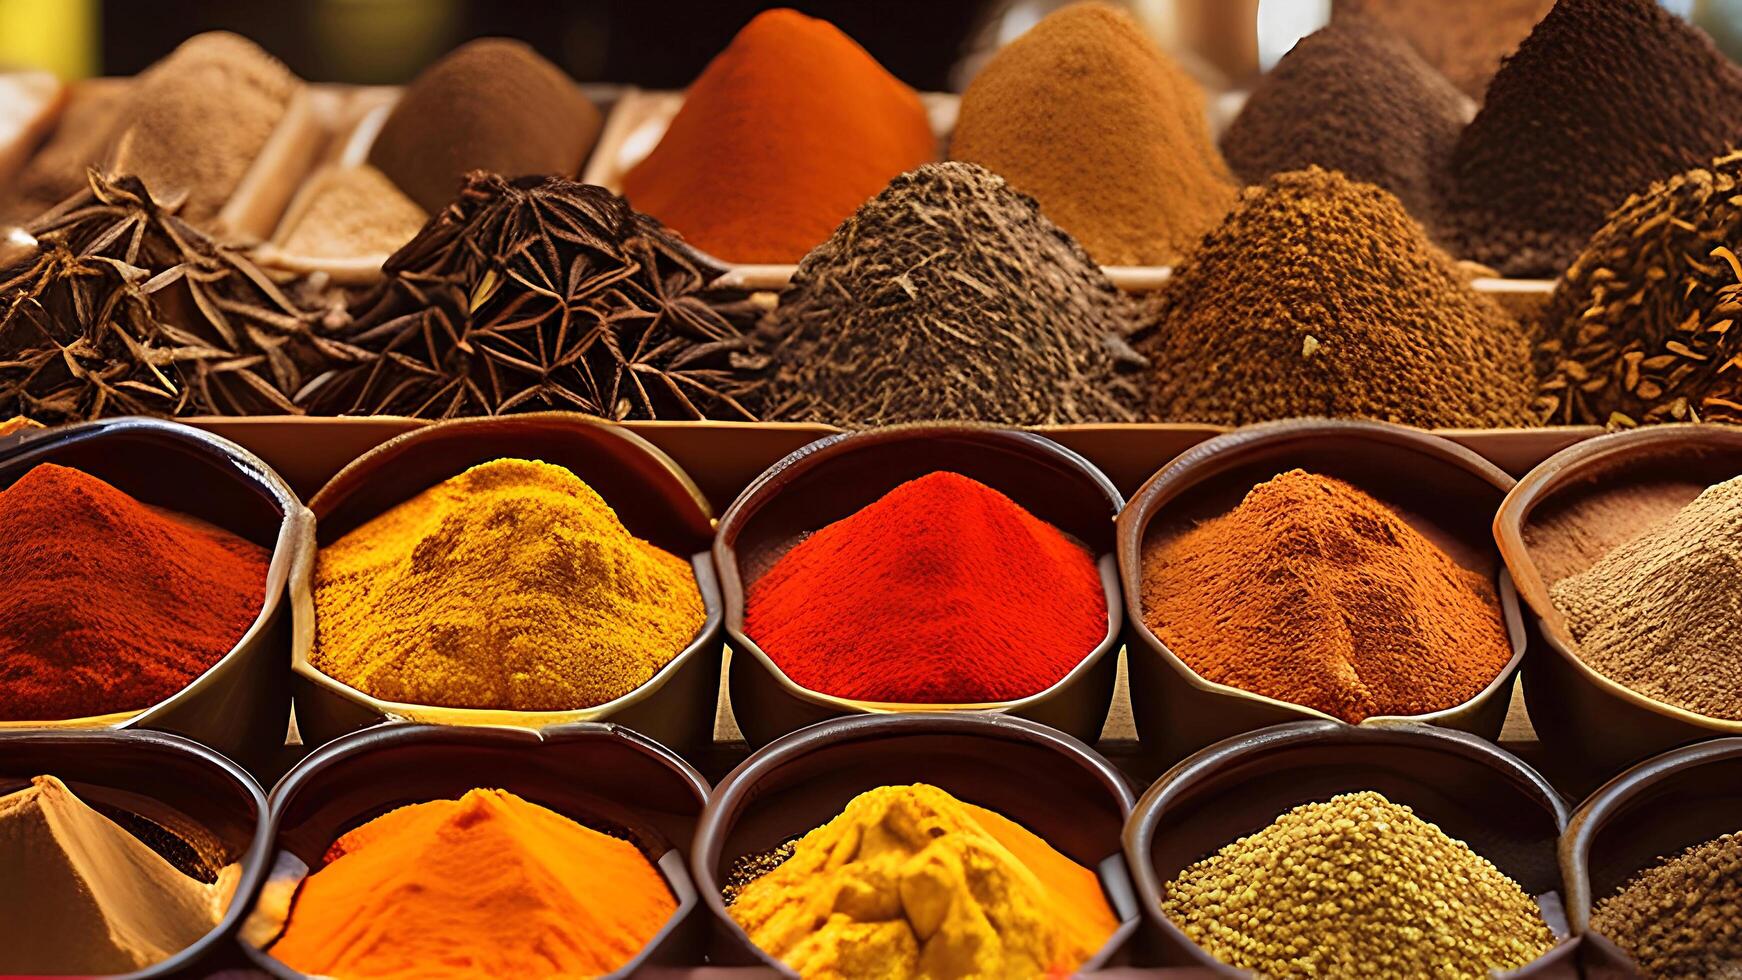 Spices in a box at a market photo